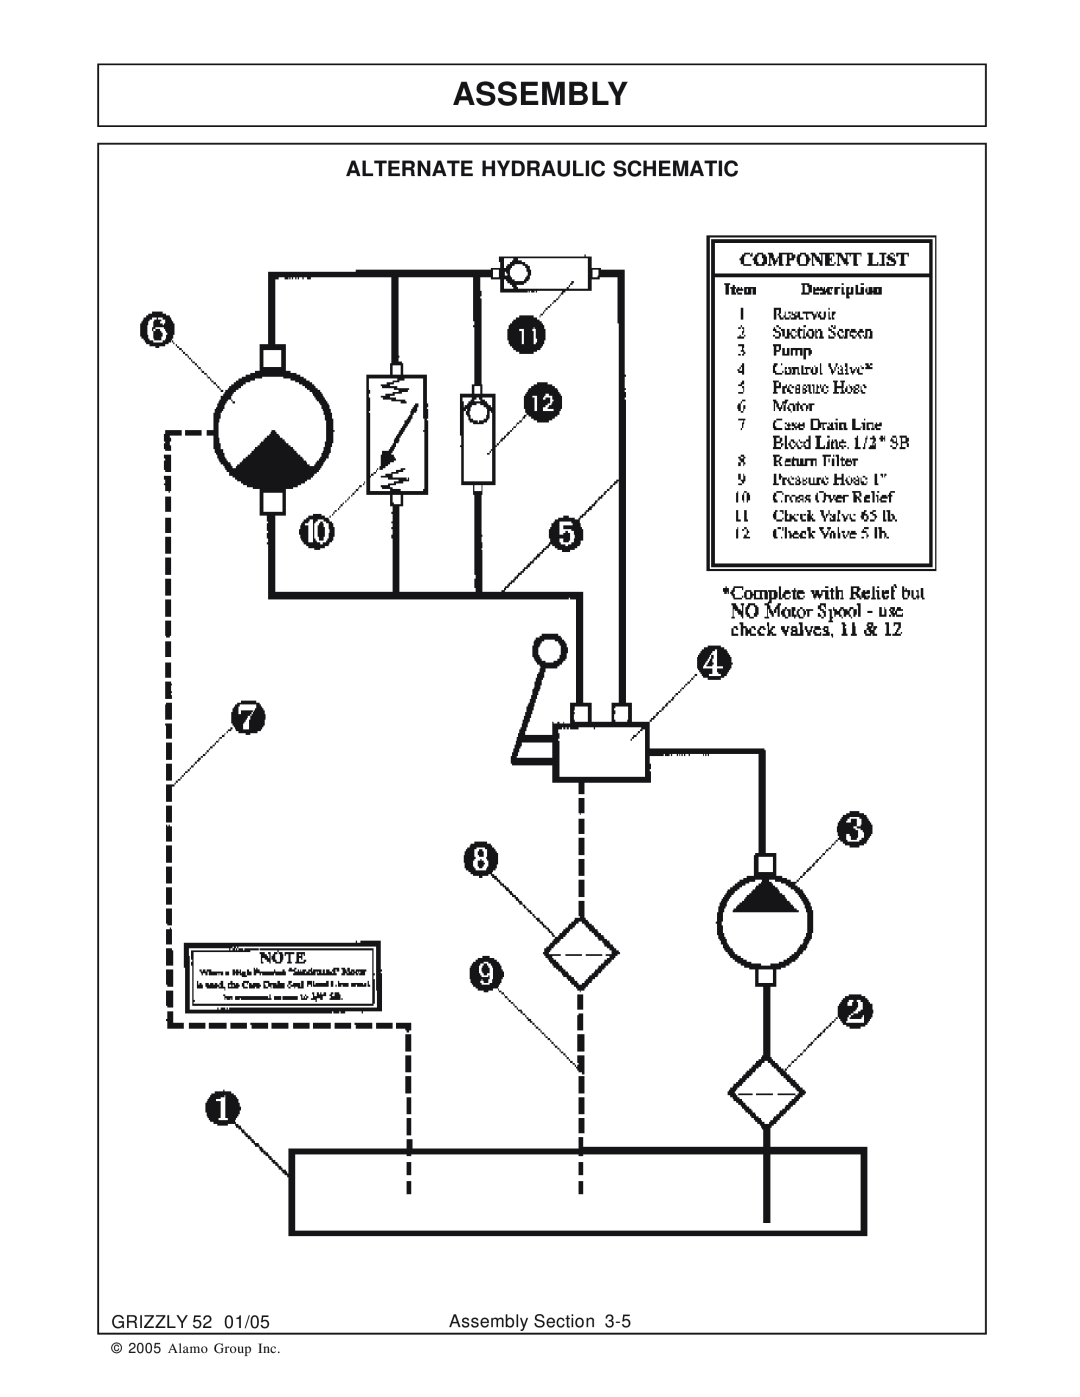 Grizzly 52 manual Assembly, Alternate Hydraulic Schematic, Alamo Group Inc 